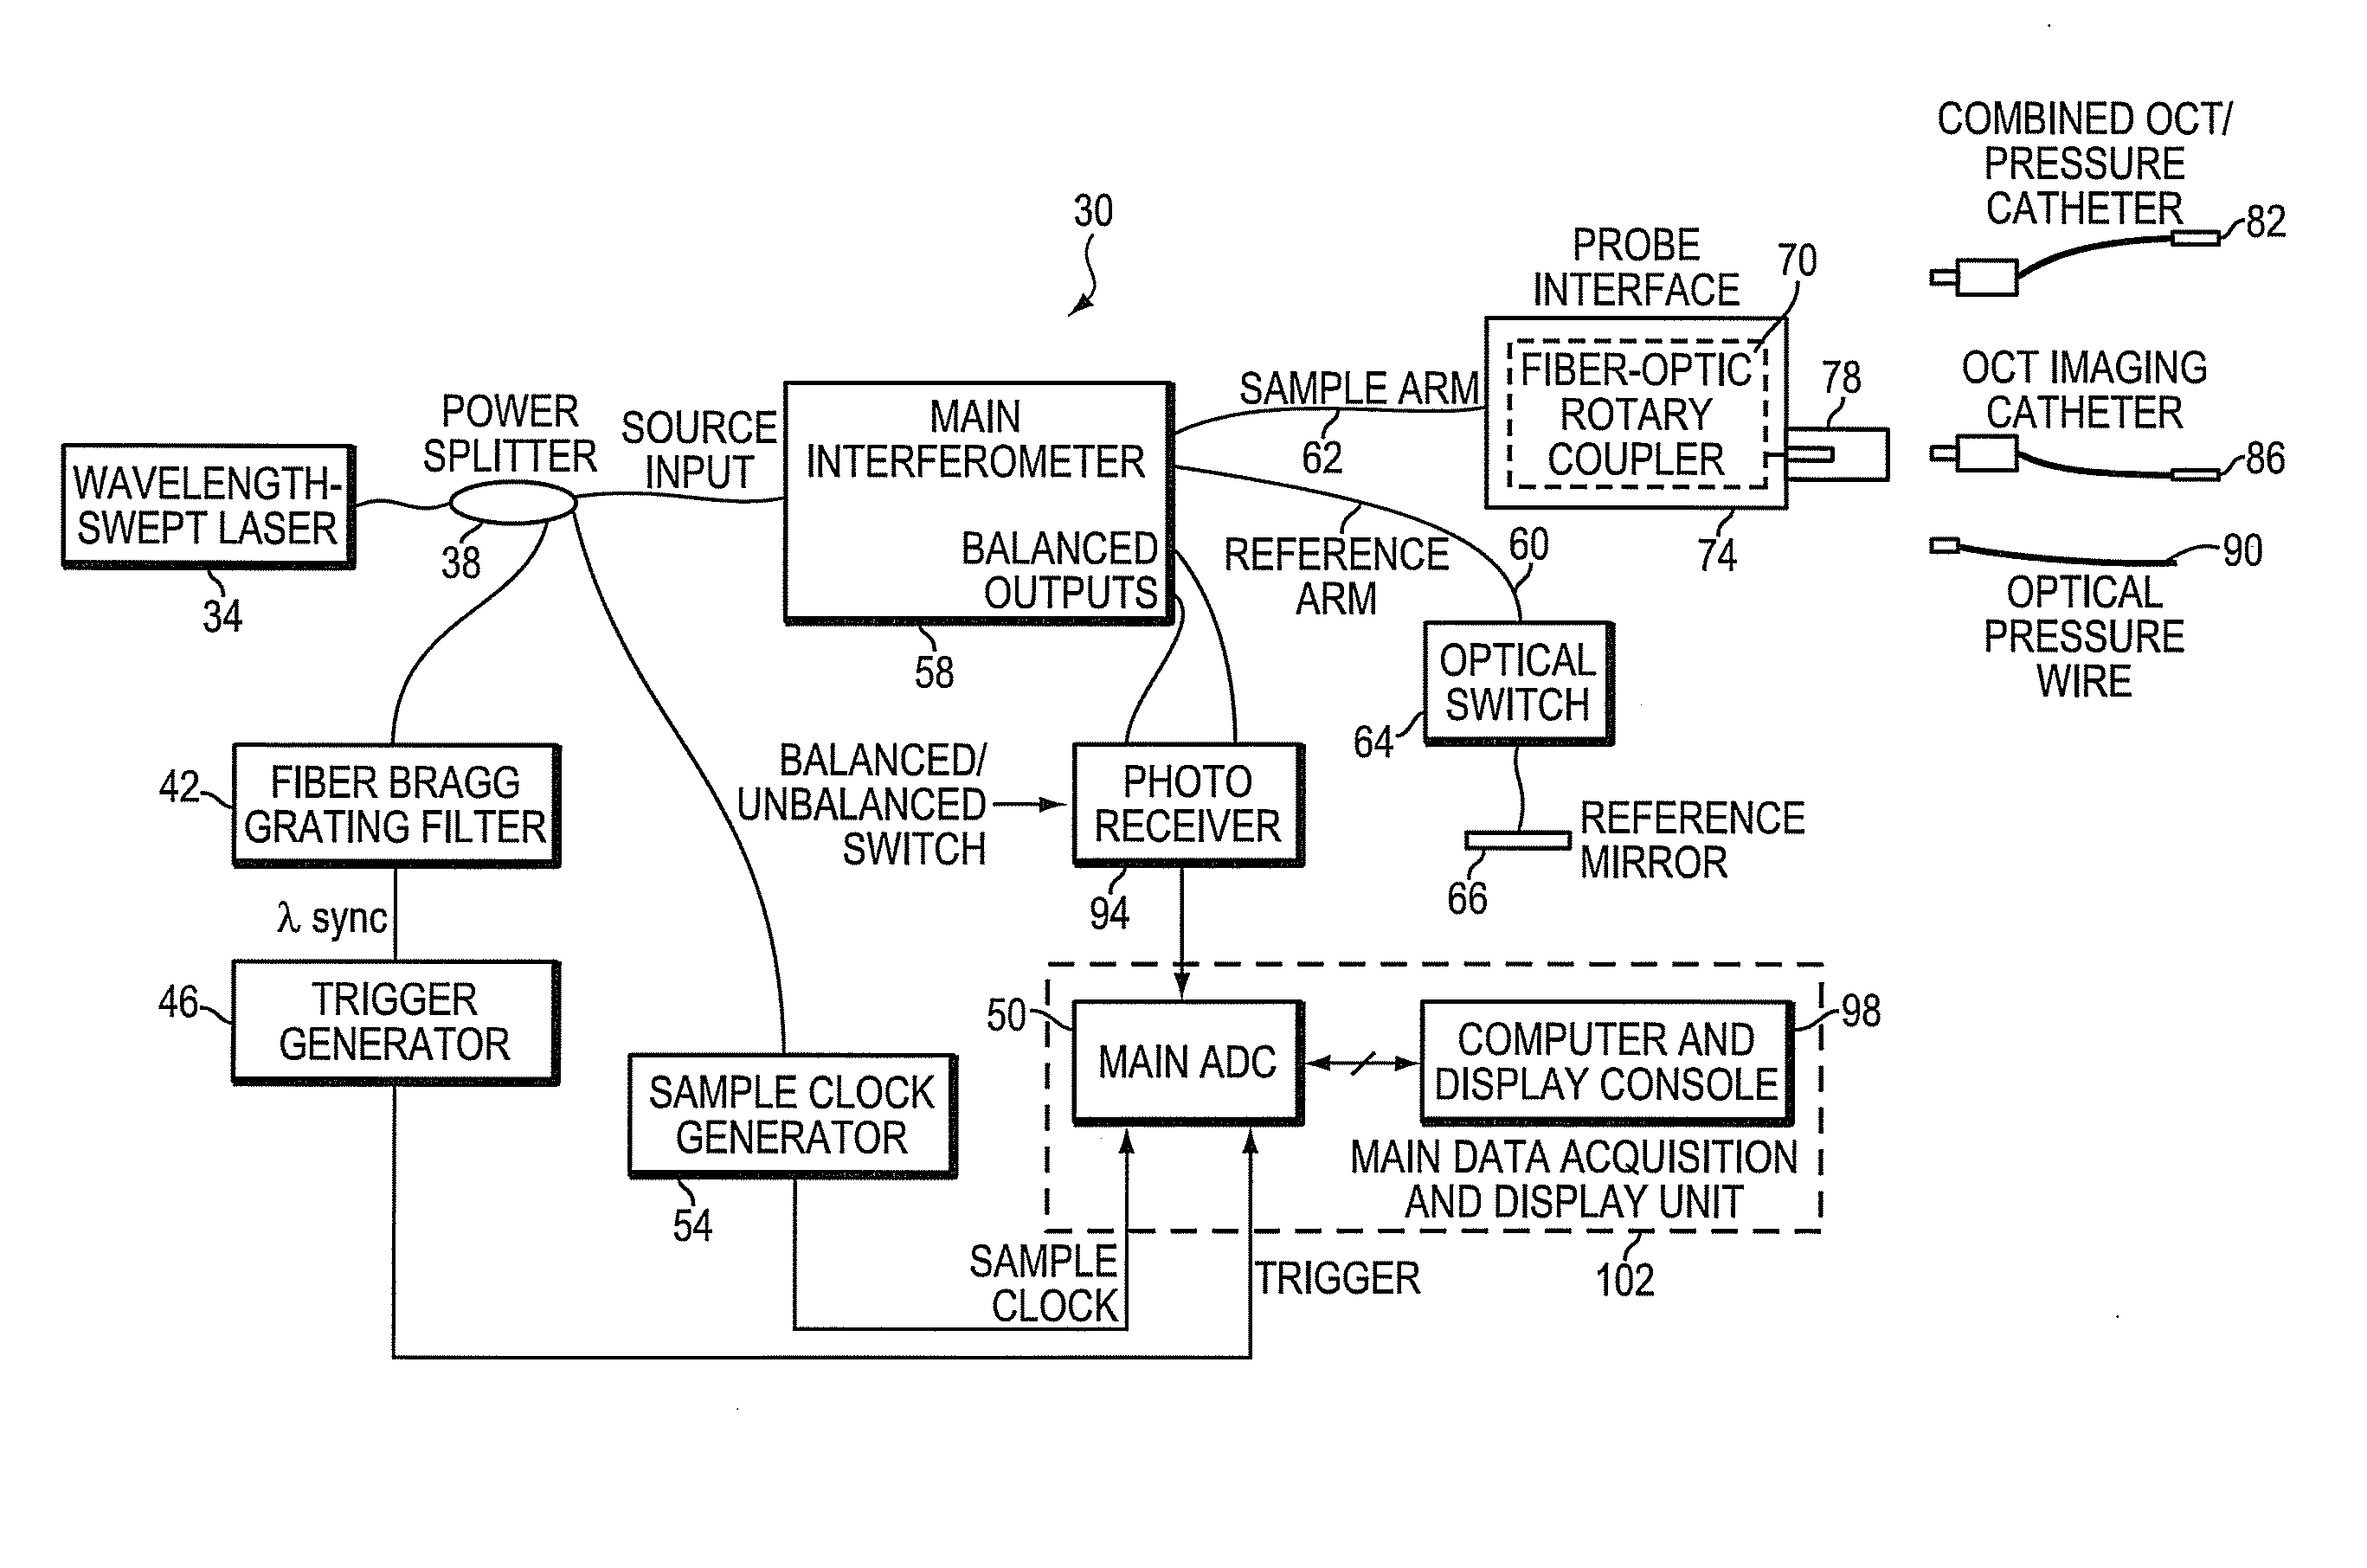 Intravascular optical coherence tomography system with pressure monitoring interface and accessories